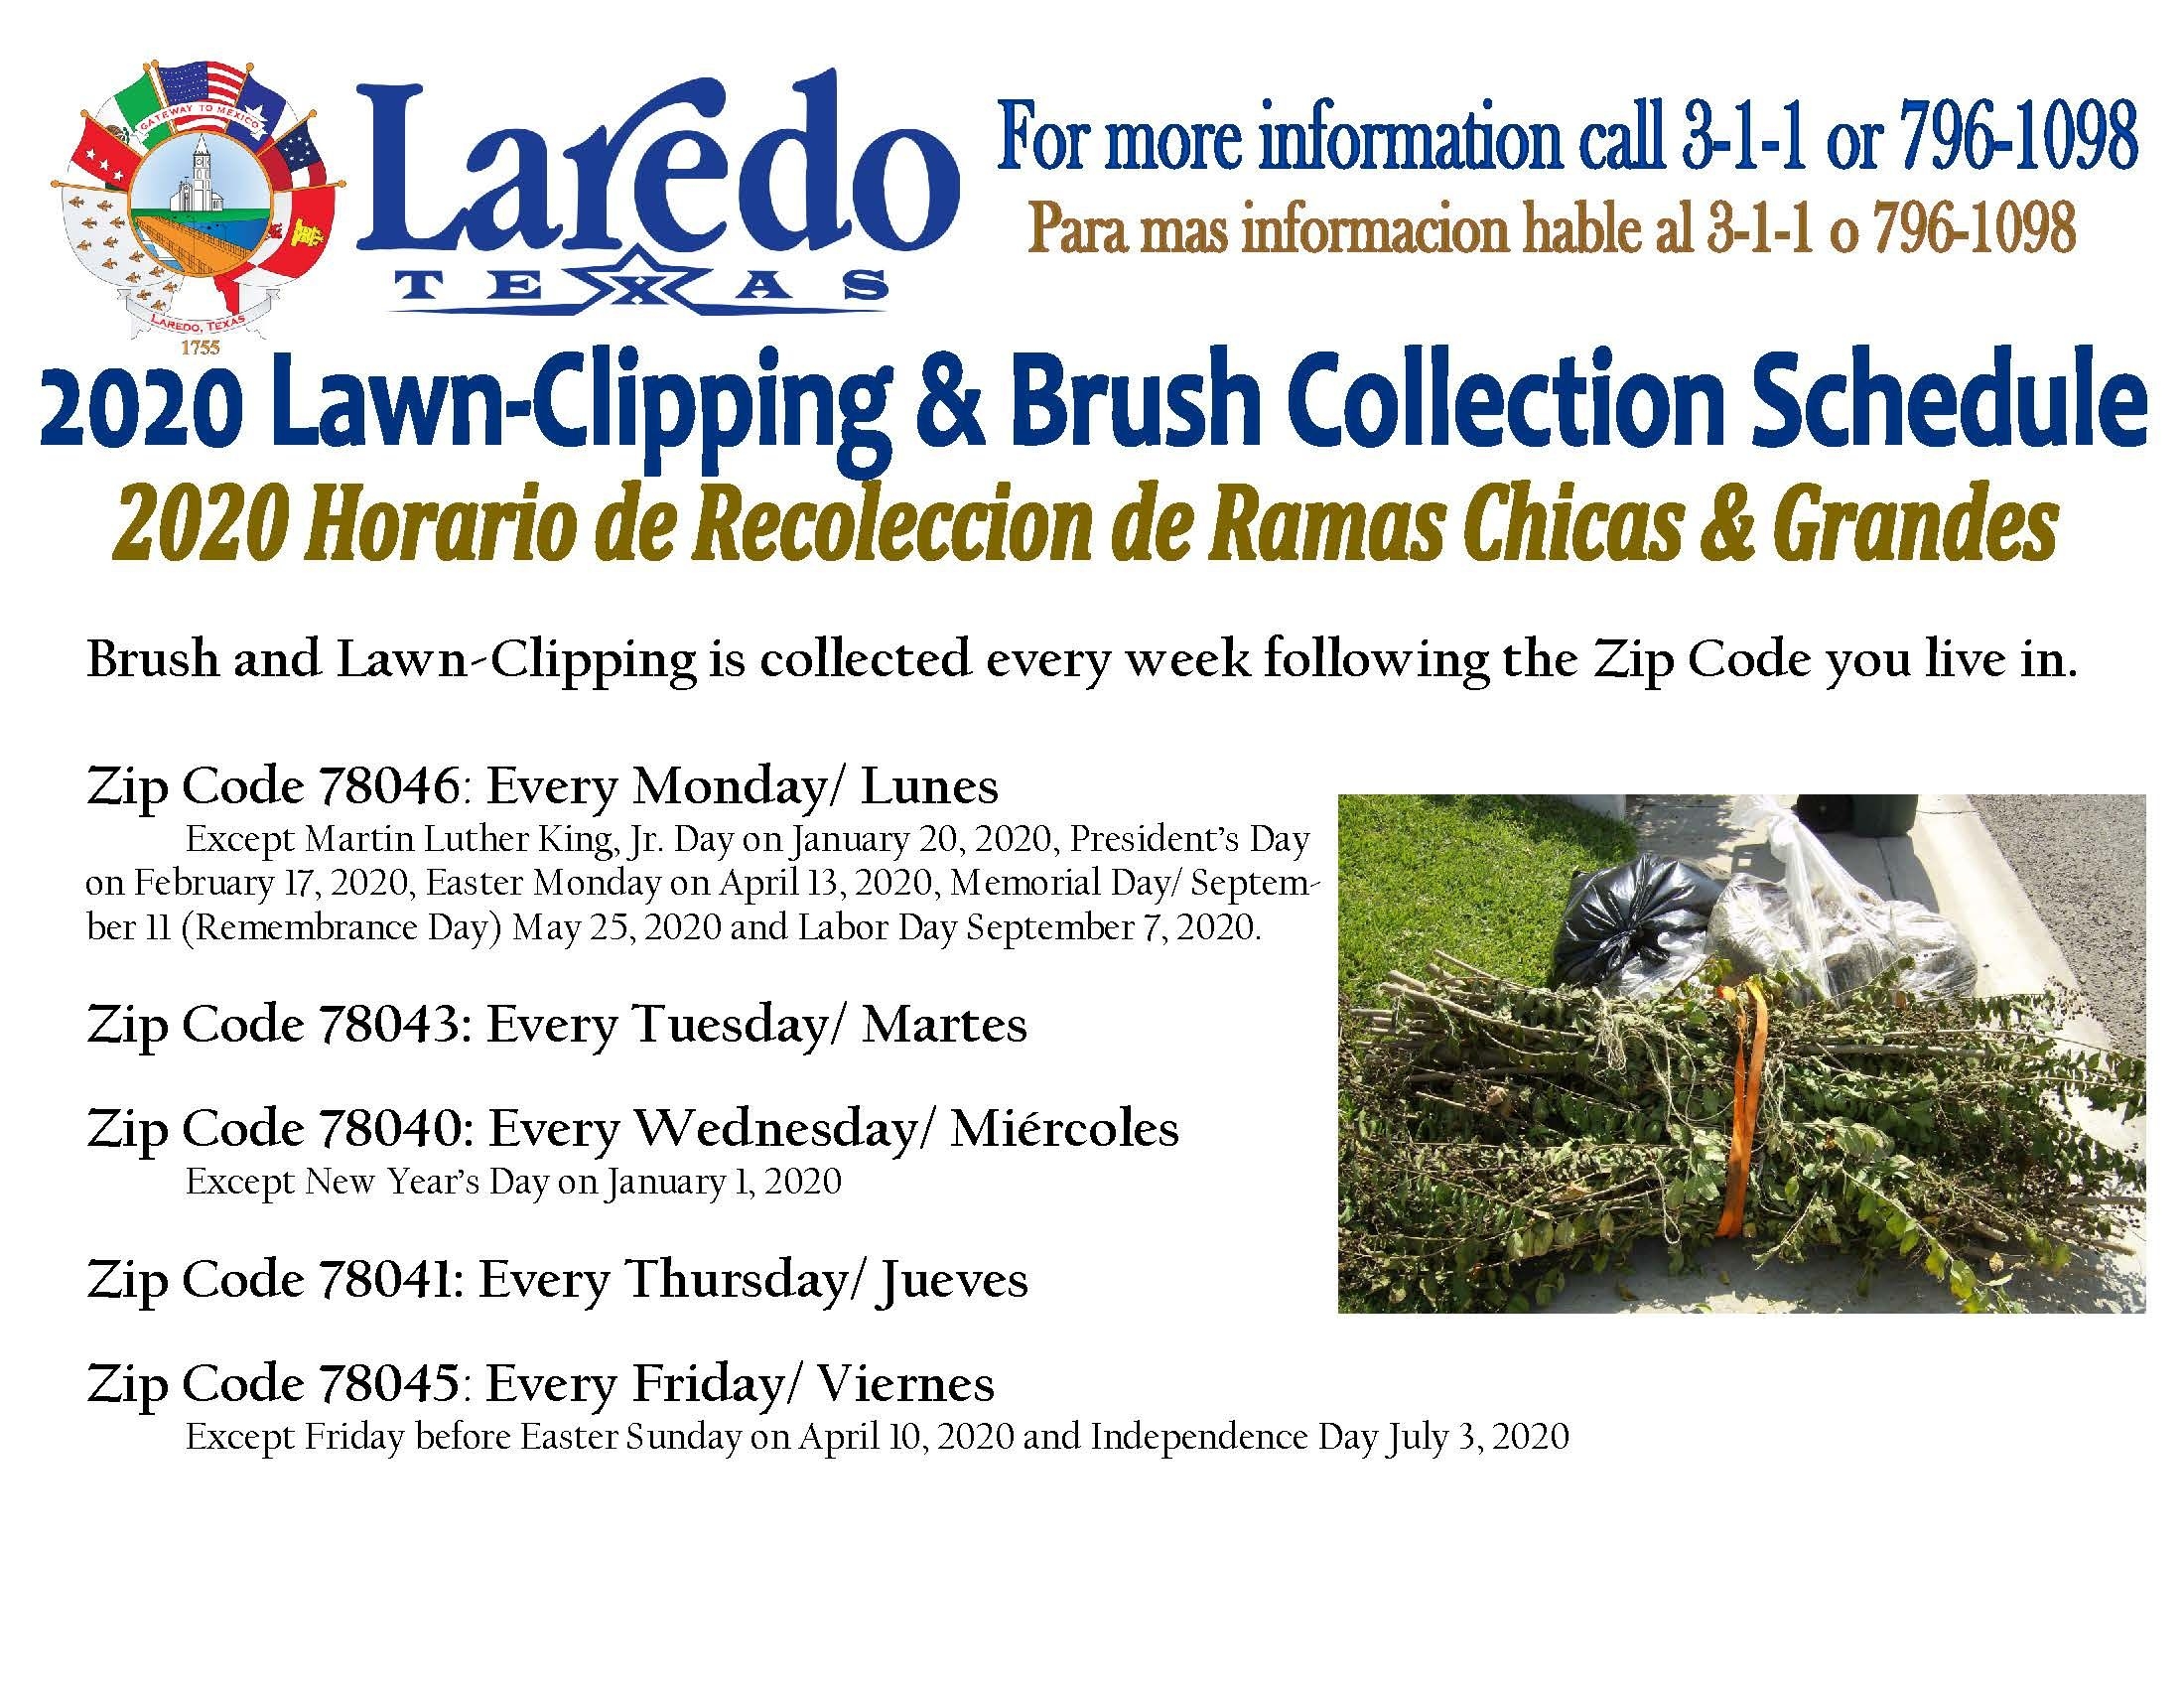 Lawn-Clipping Collection Service